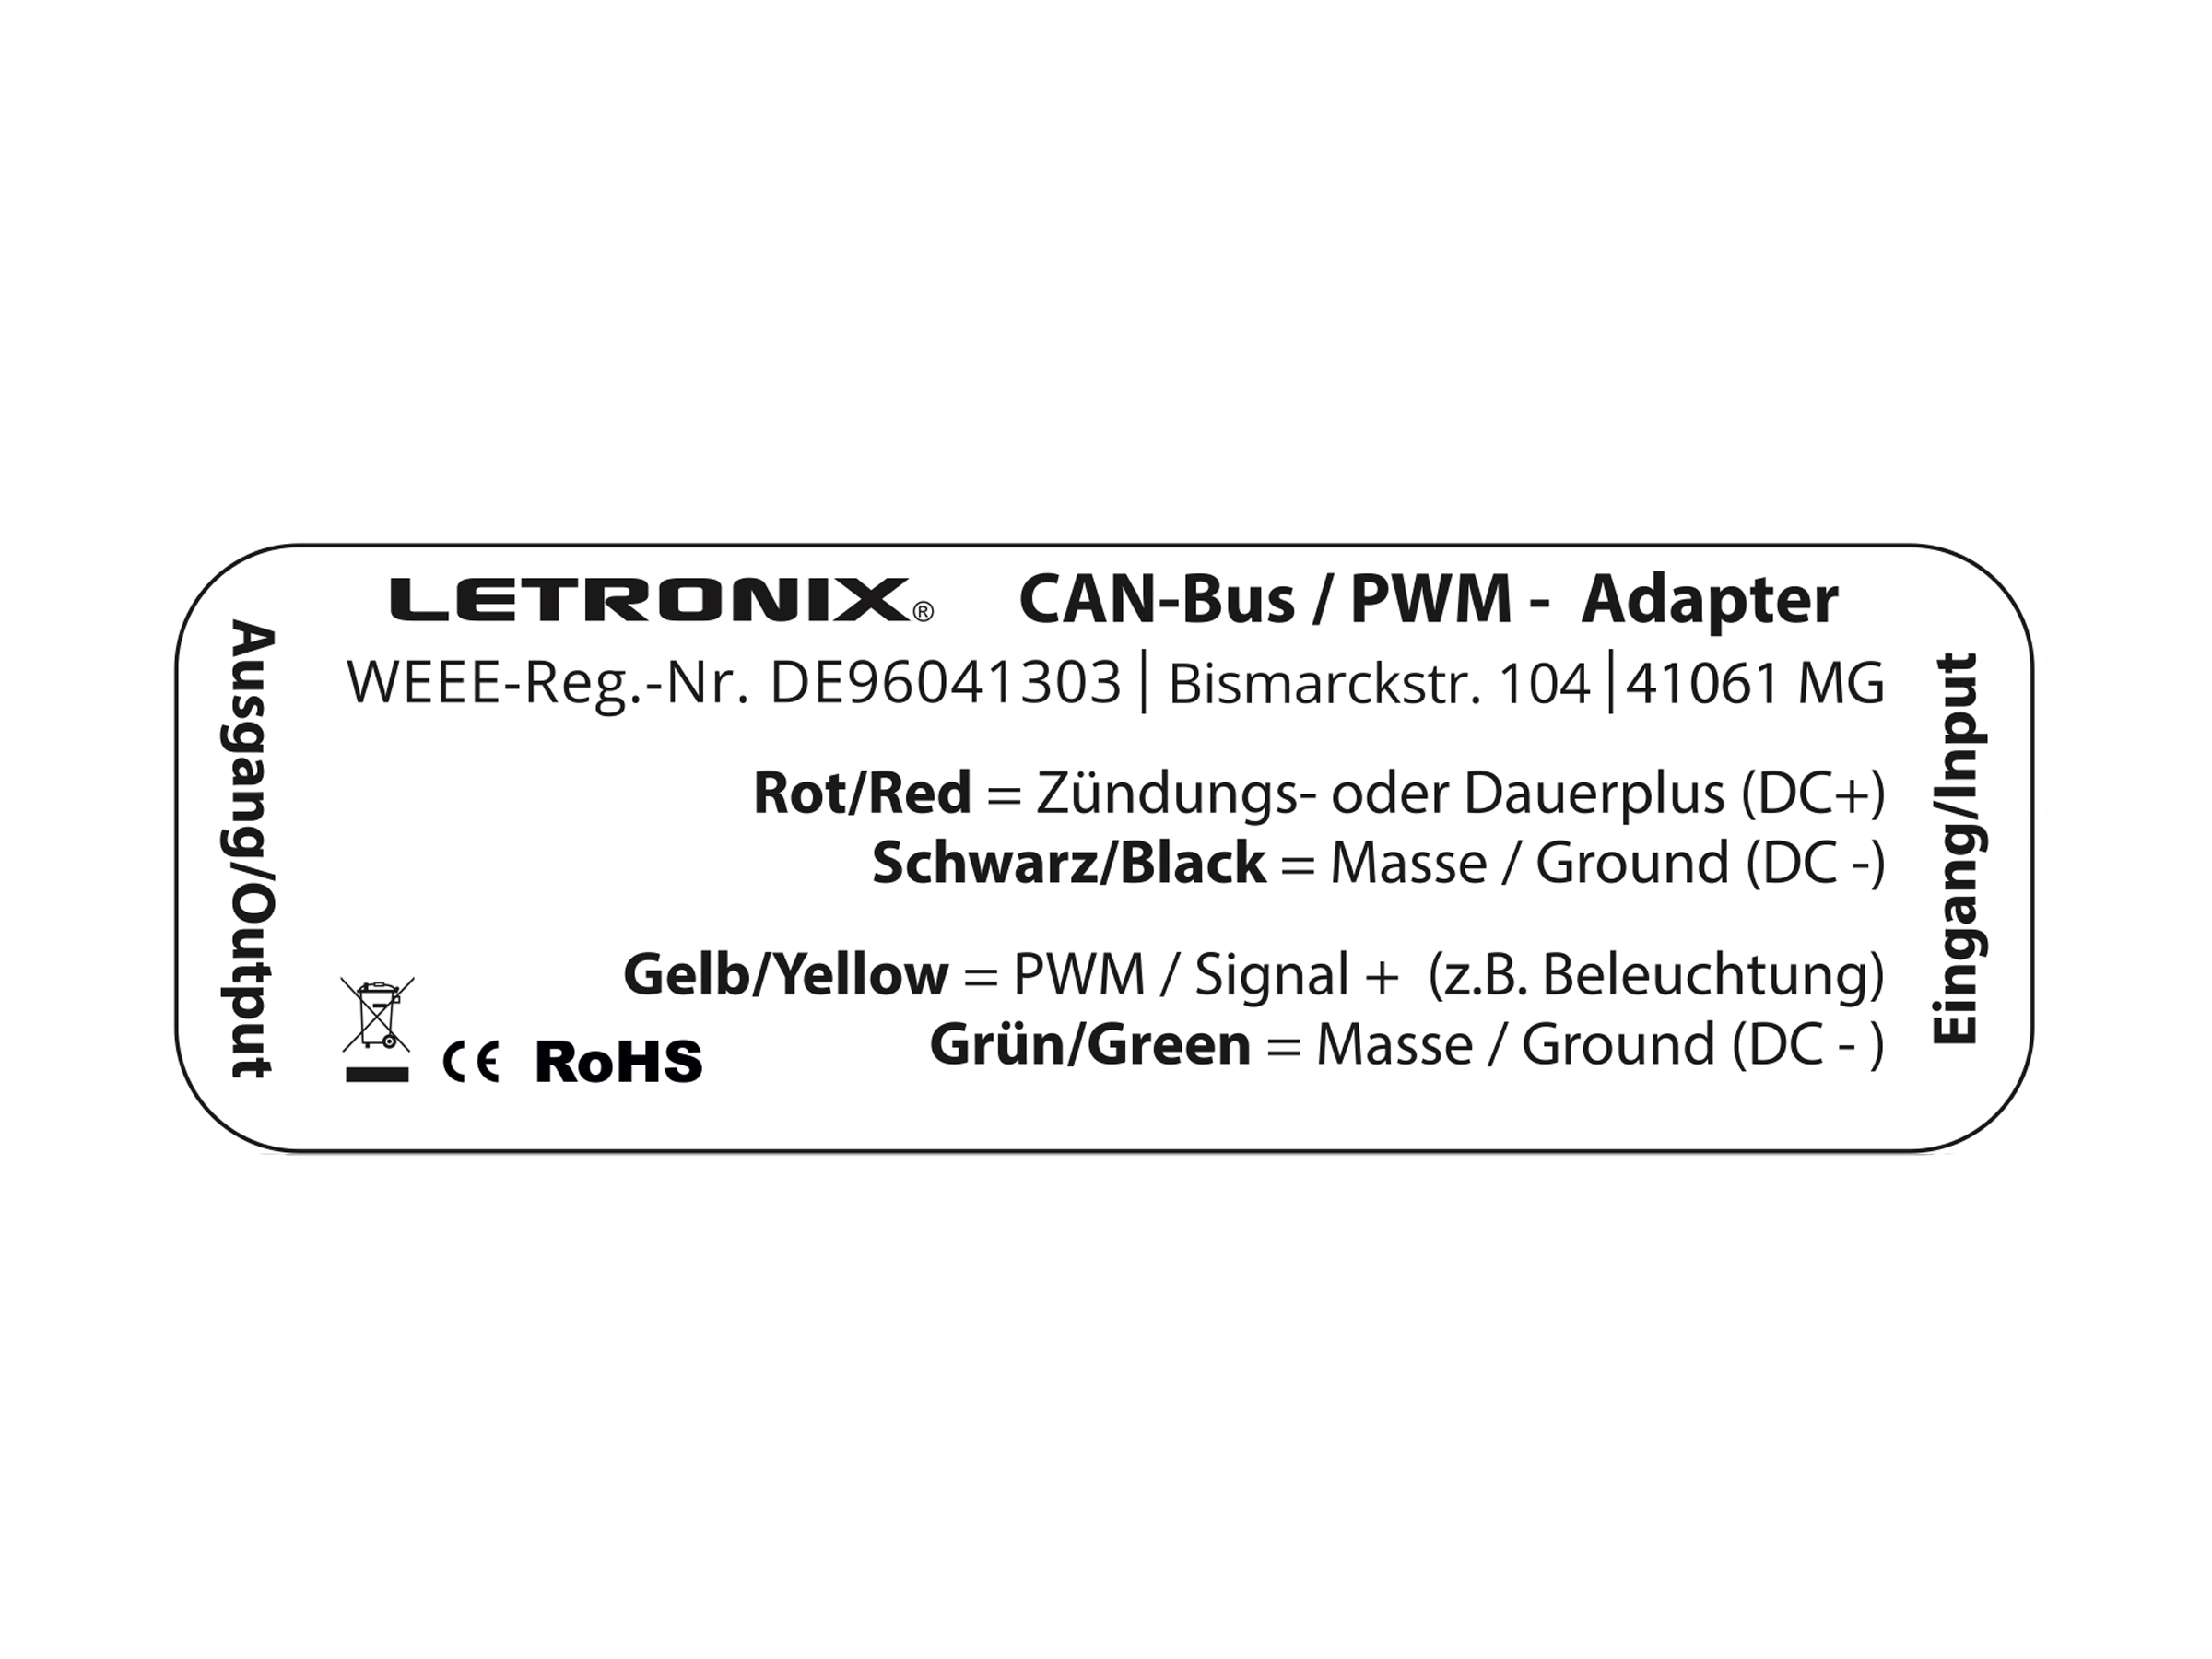 LETRONIX RGBIC LED PWM CAN-Bus Adapter für RGBIC Full LED